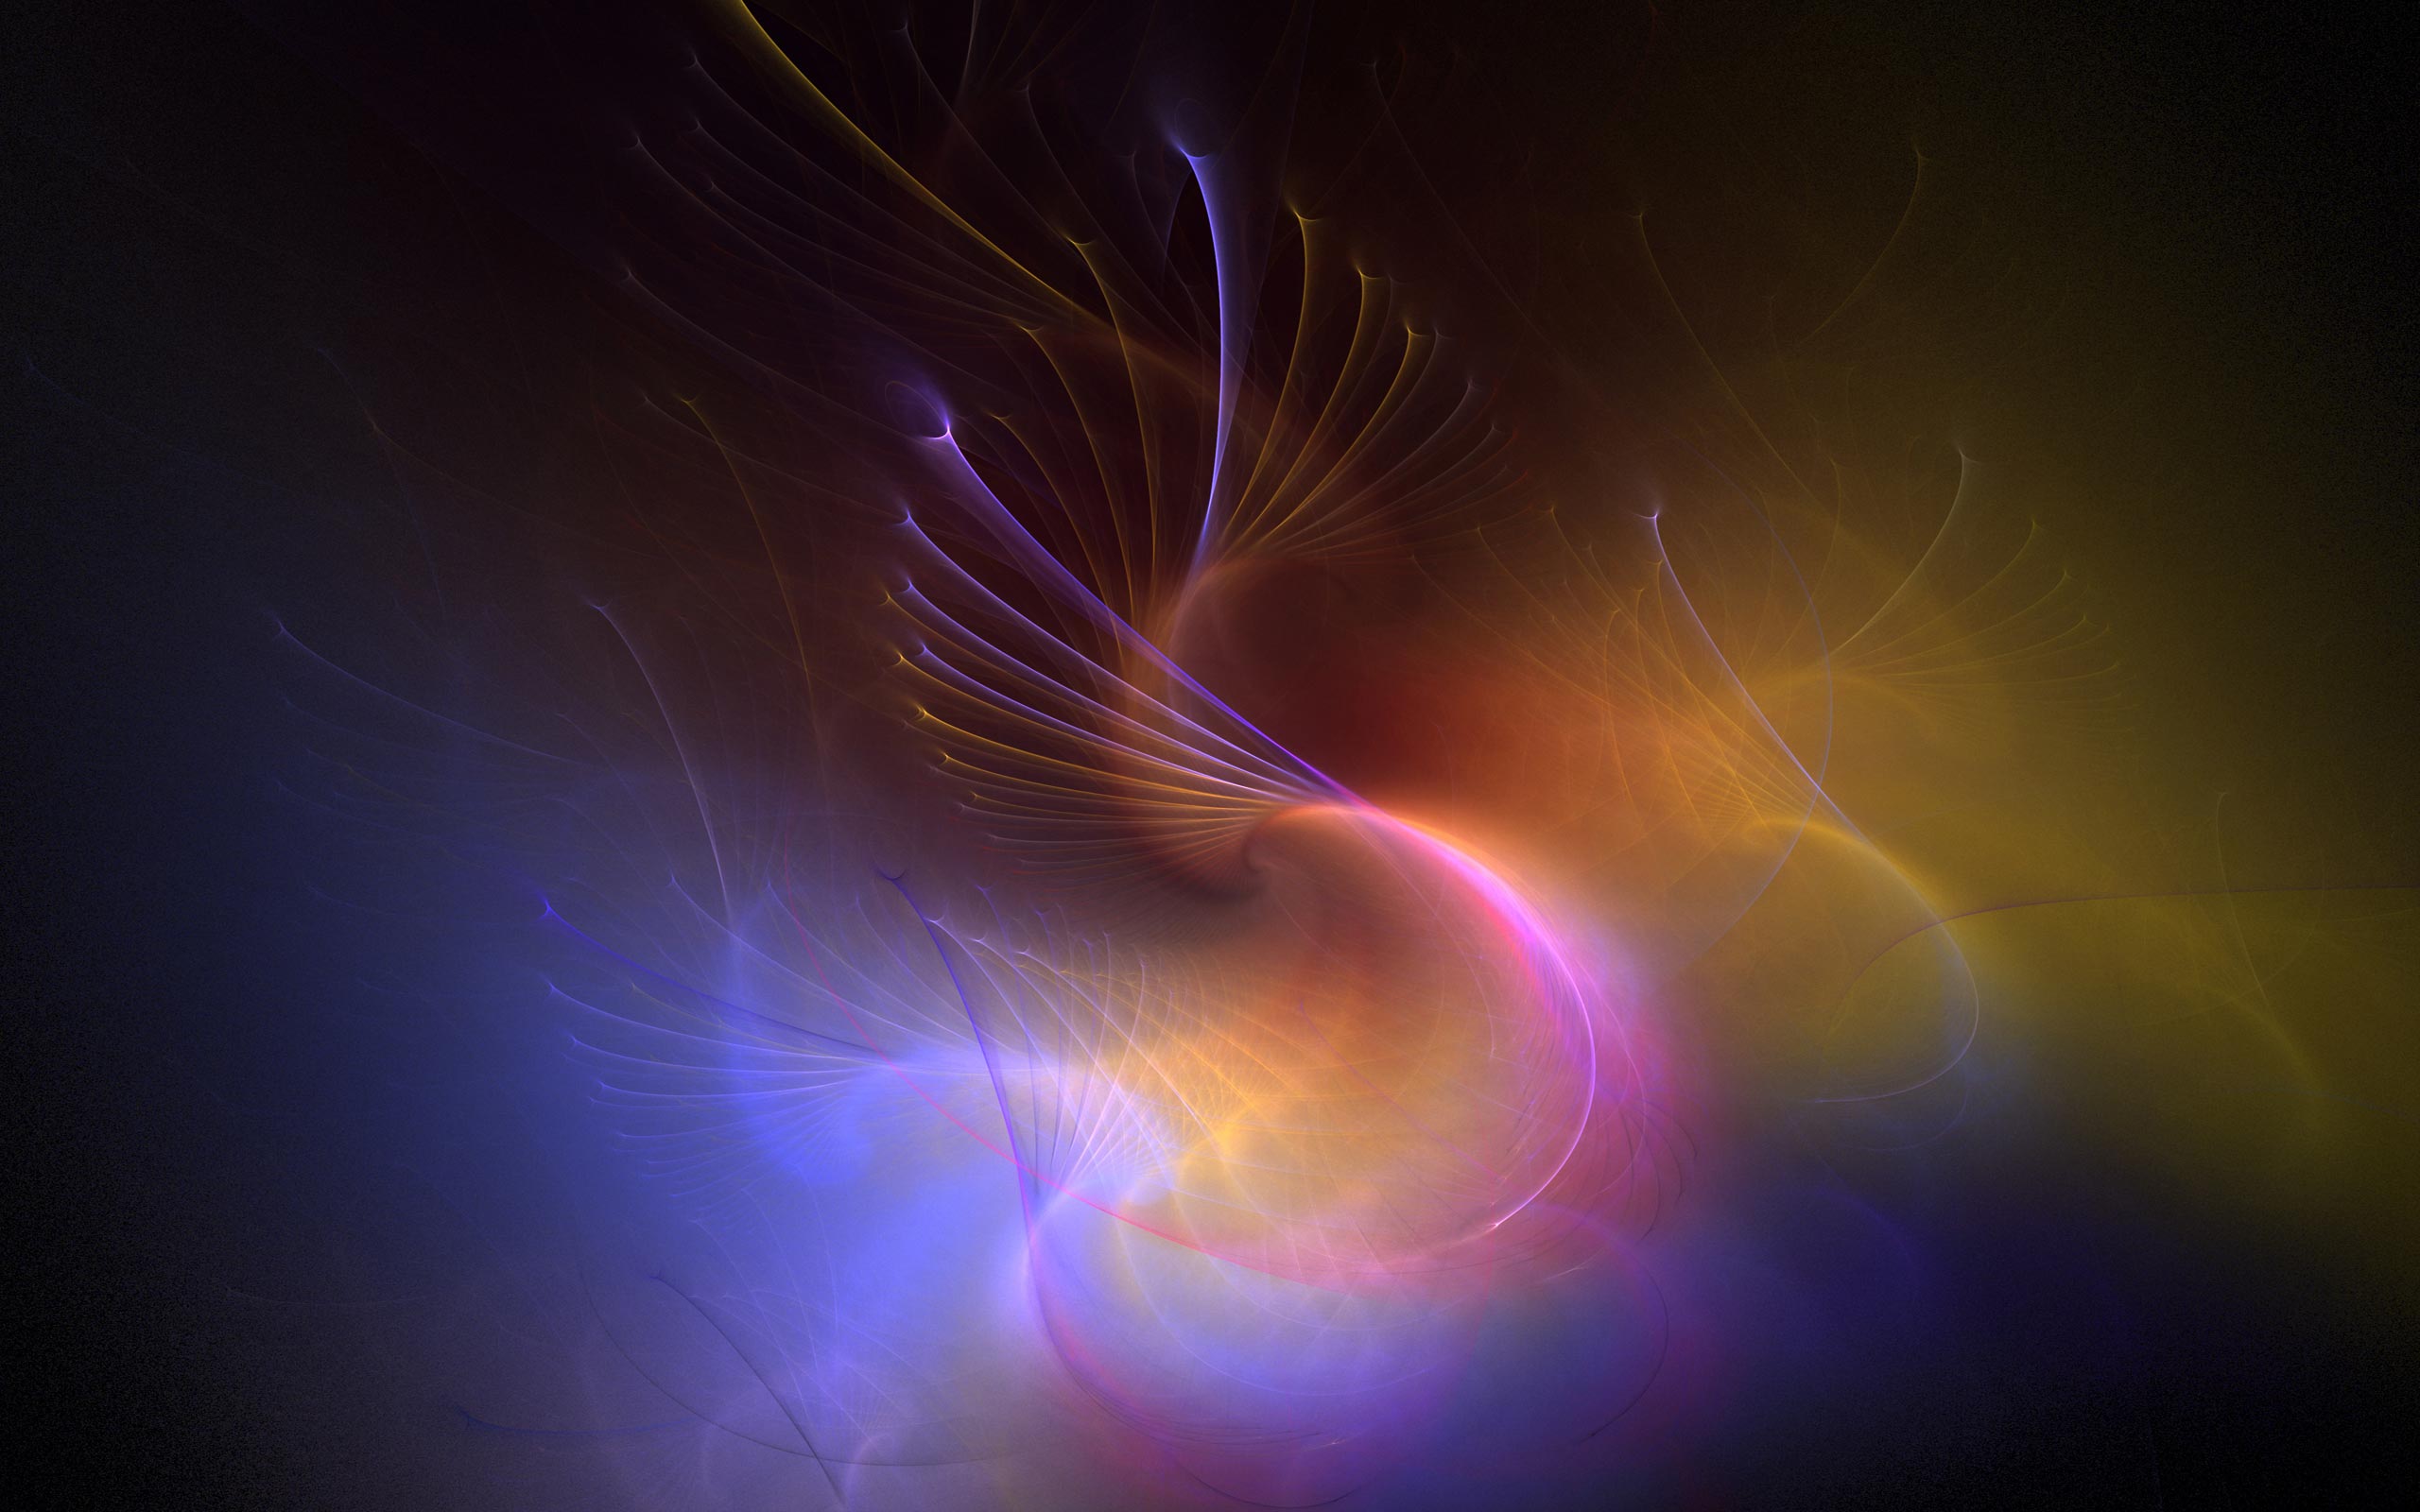  Abstract Desktop Backgrounds HD Wallpapers Art Images colorful